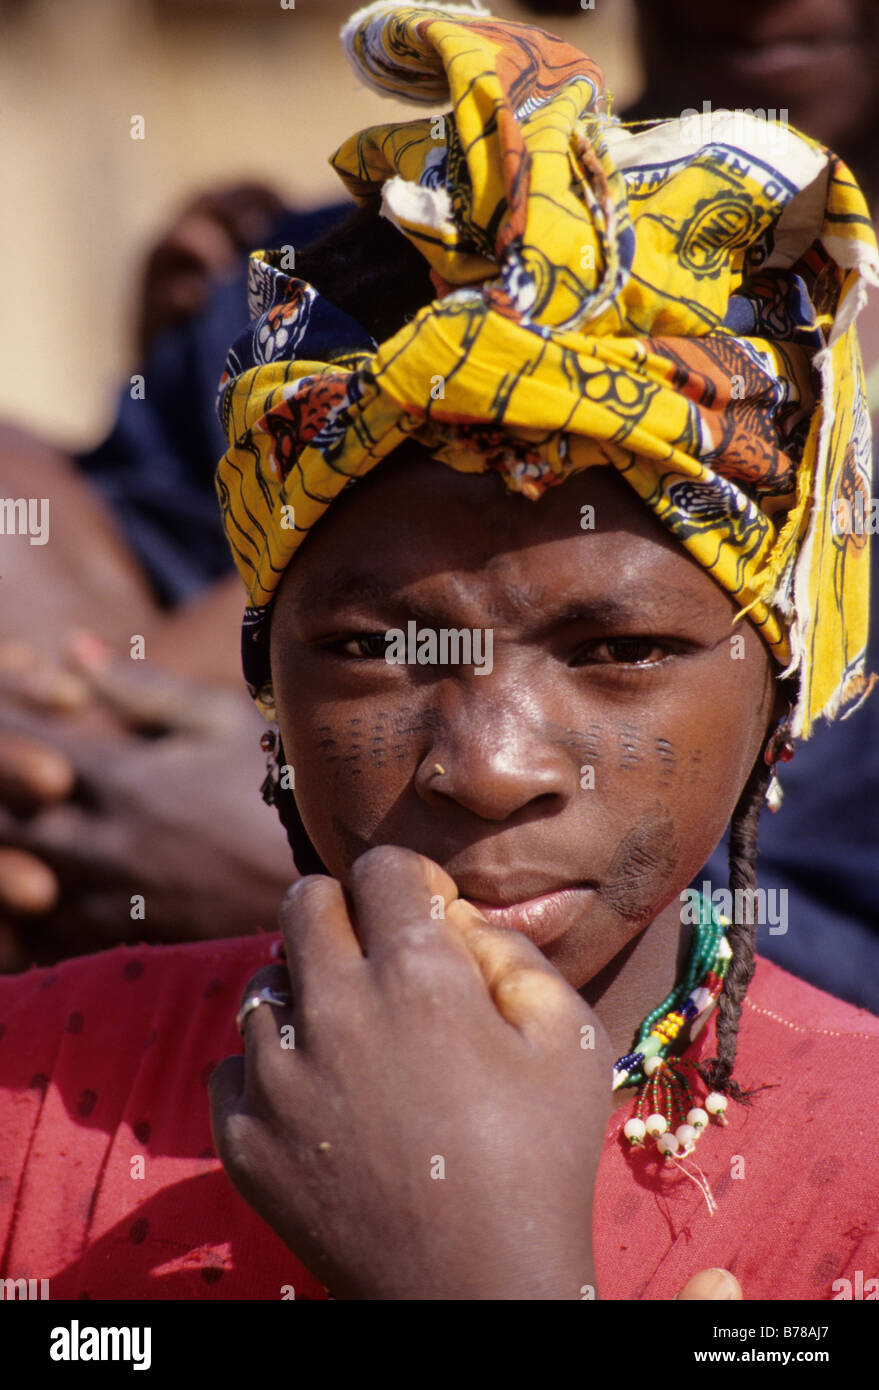 Delaquara, Niger. Young Fulani Woman with Facial Scarification for Tribal Identification. Stock Photo